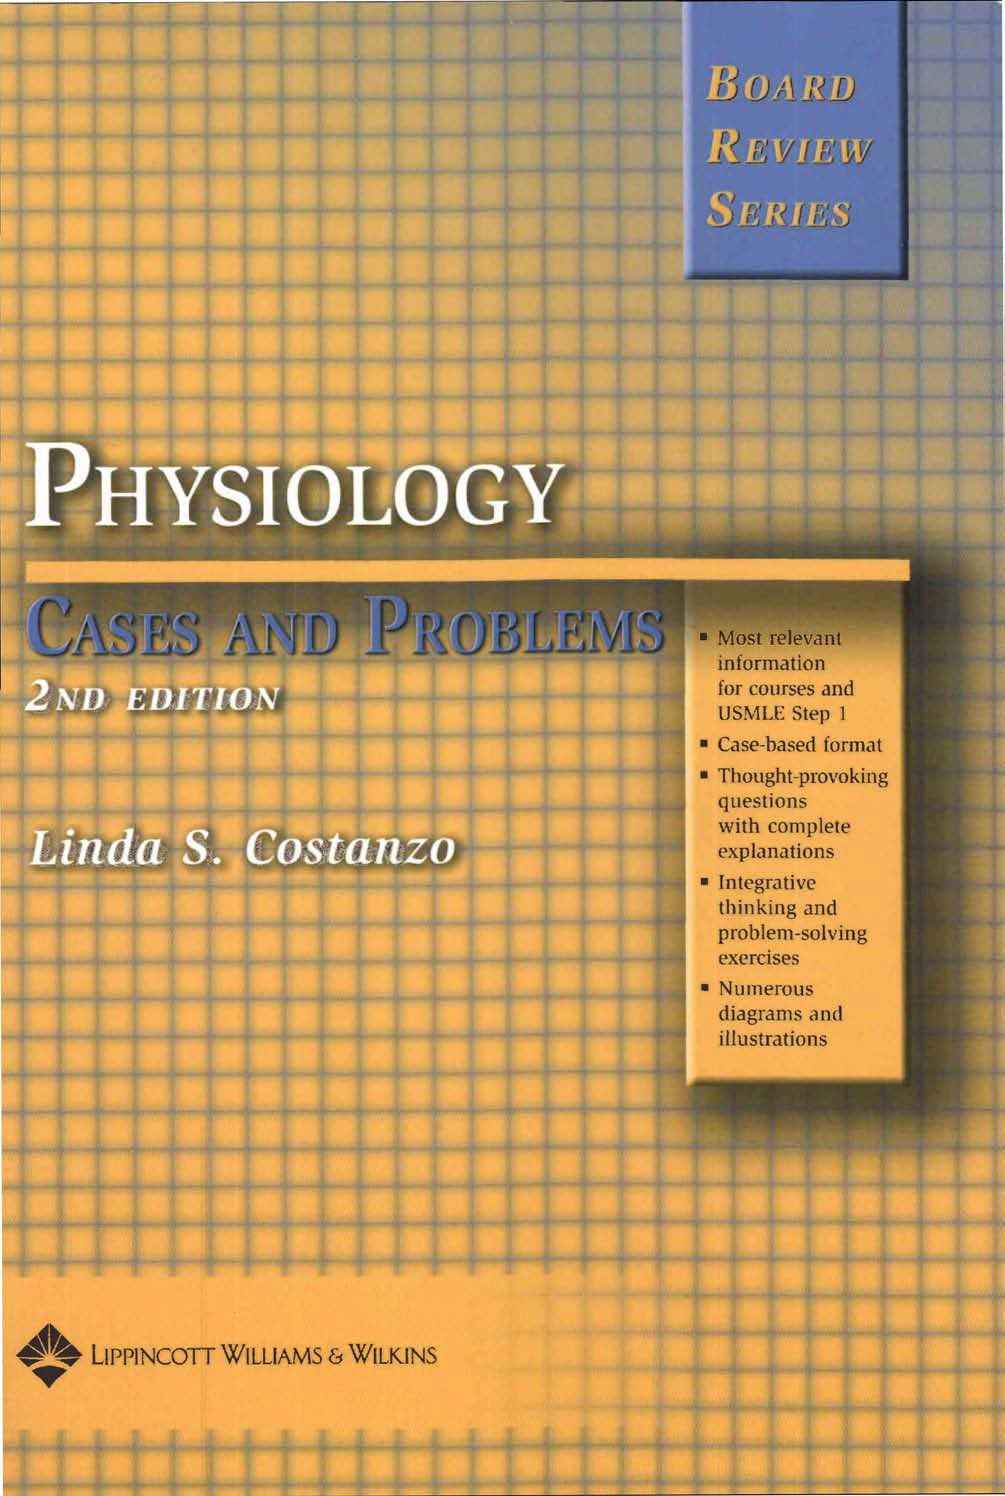 BRS Physiology problems and cases 2nd edition pdf book free download